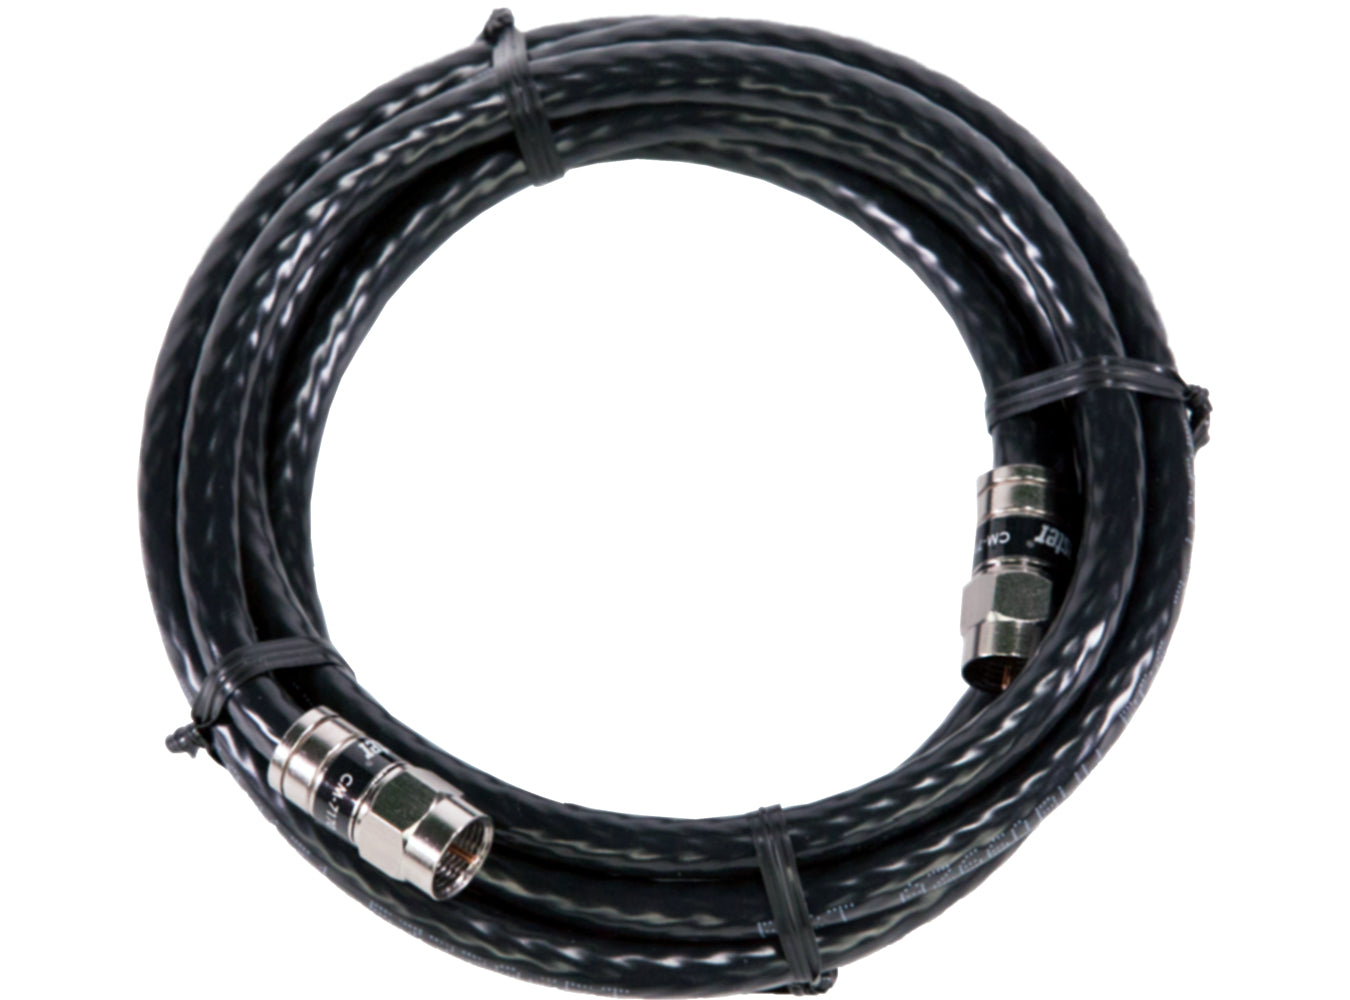 3' Coaxial Cable Black | Channel Master (CM-3701)